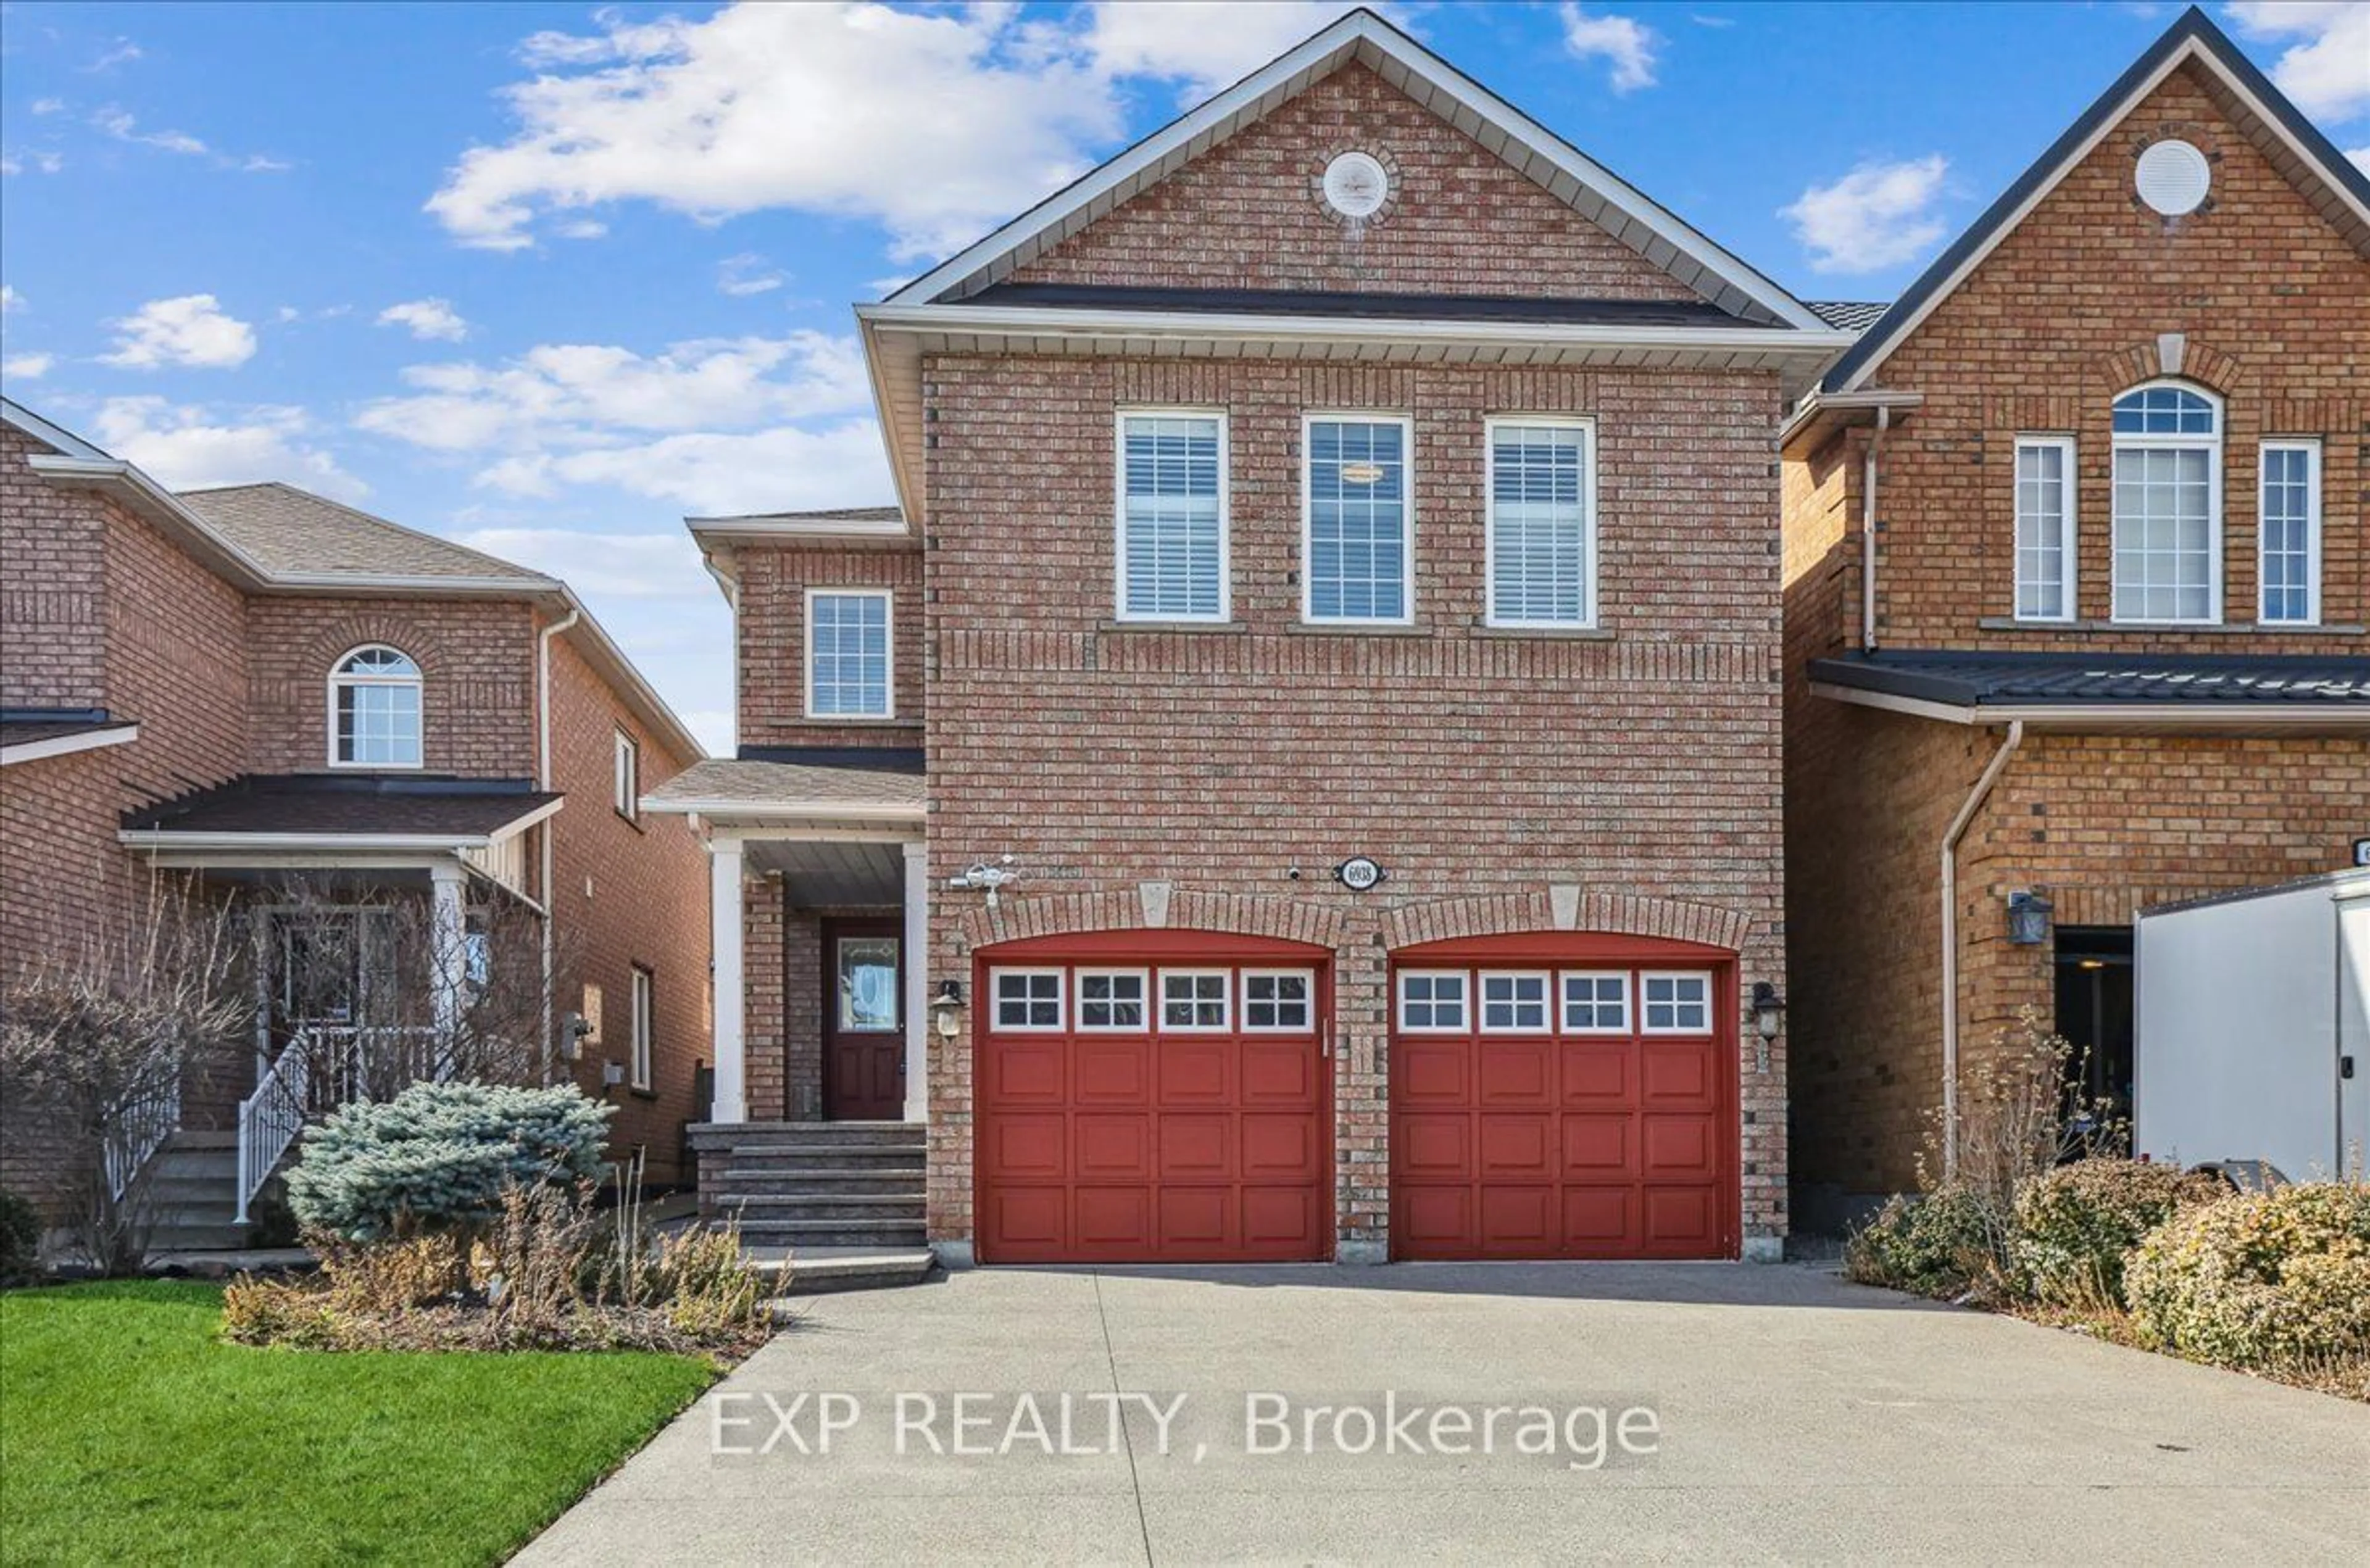 Home with brick exterior material for 6938 Amour Terr, Mississauga Ontario L5W 1G5